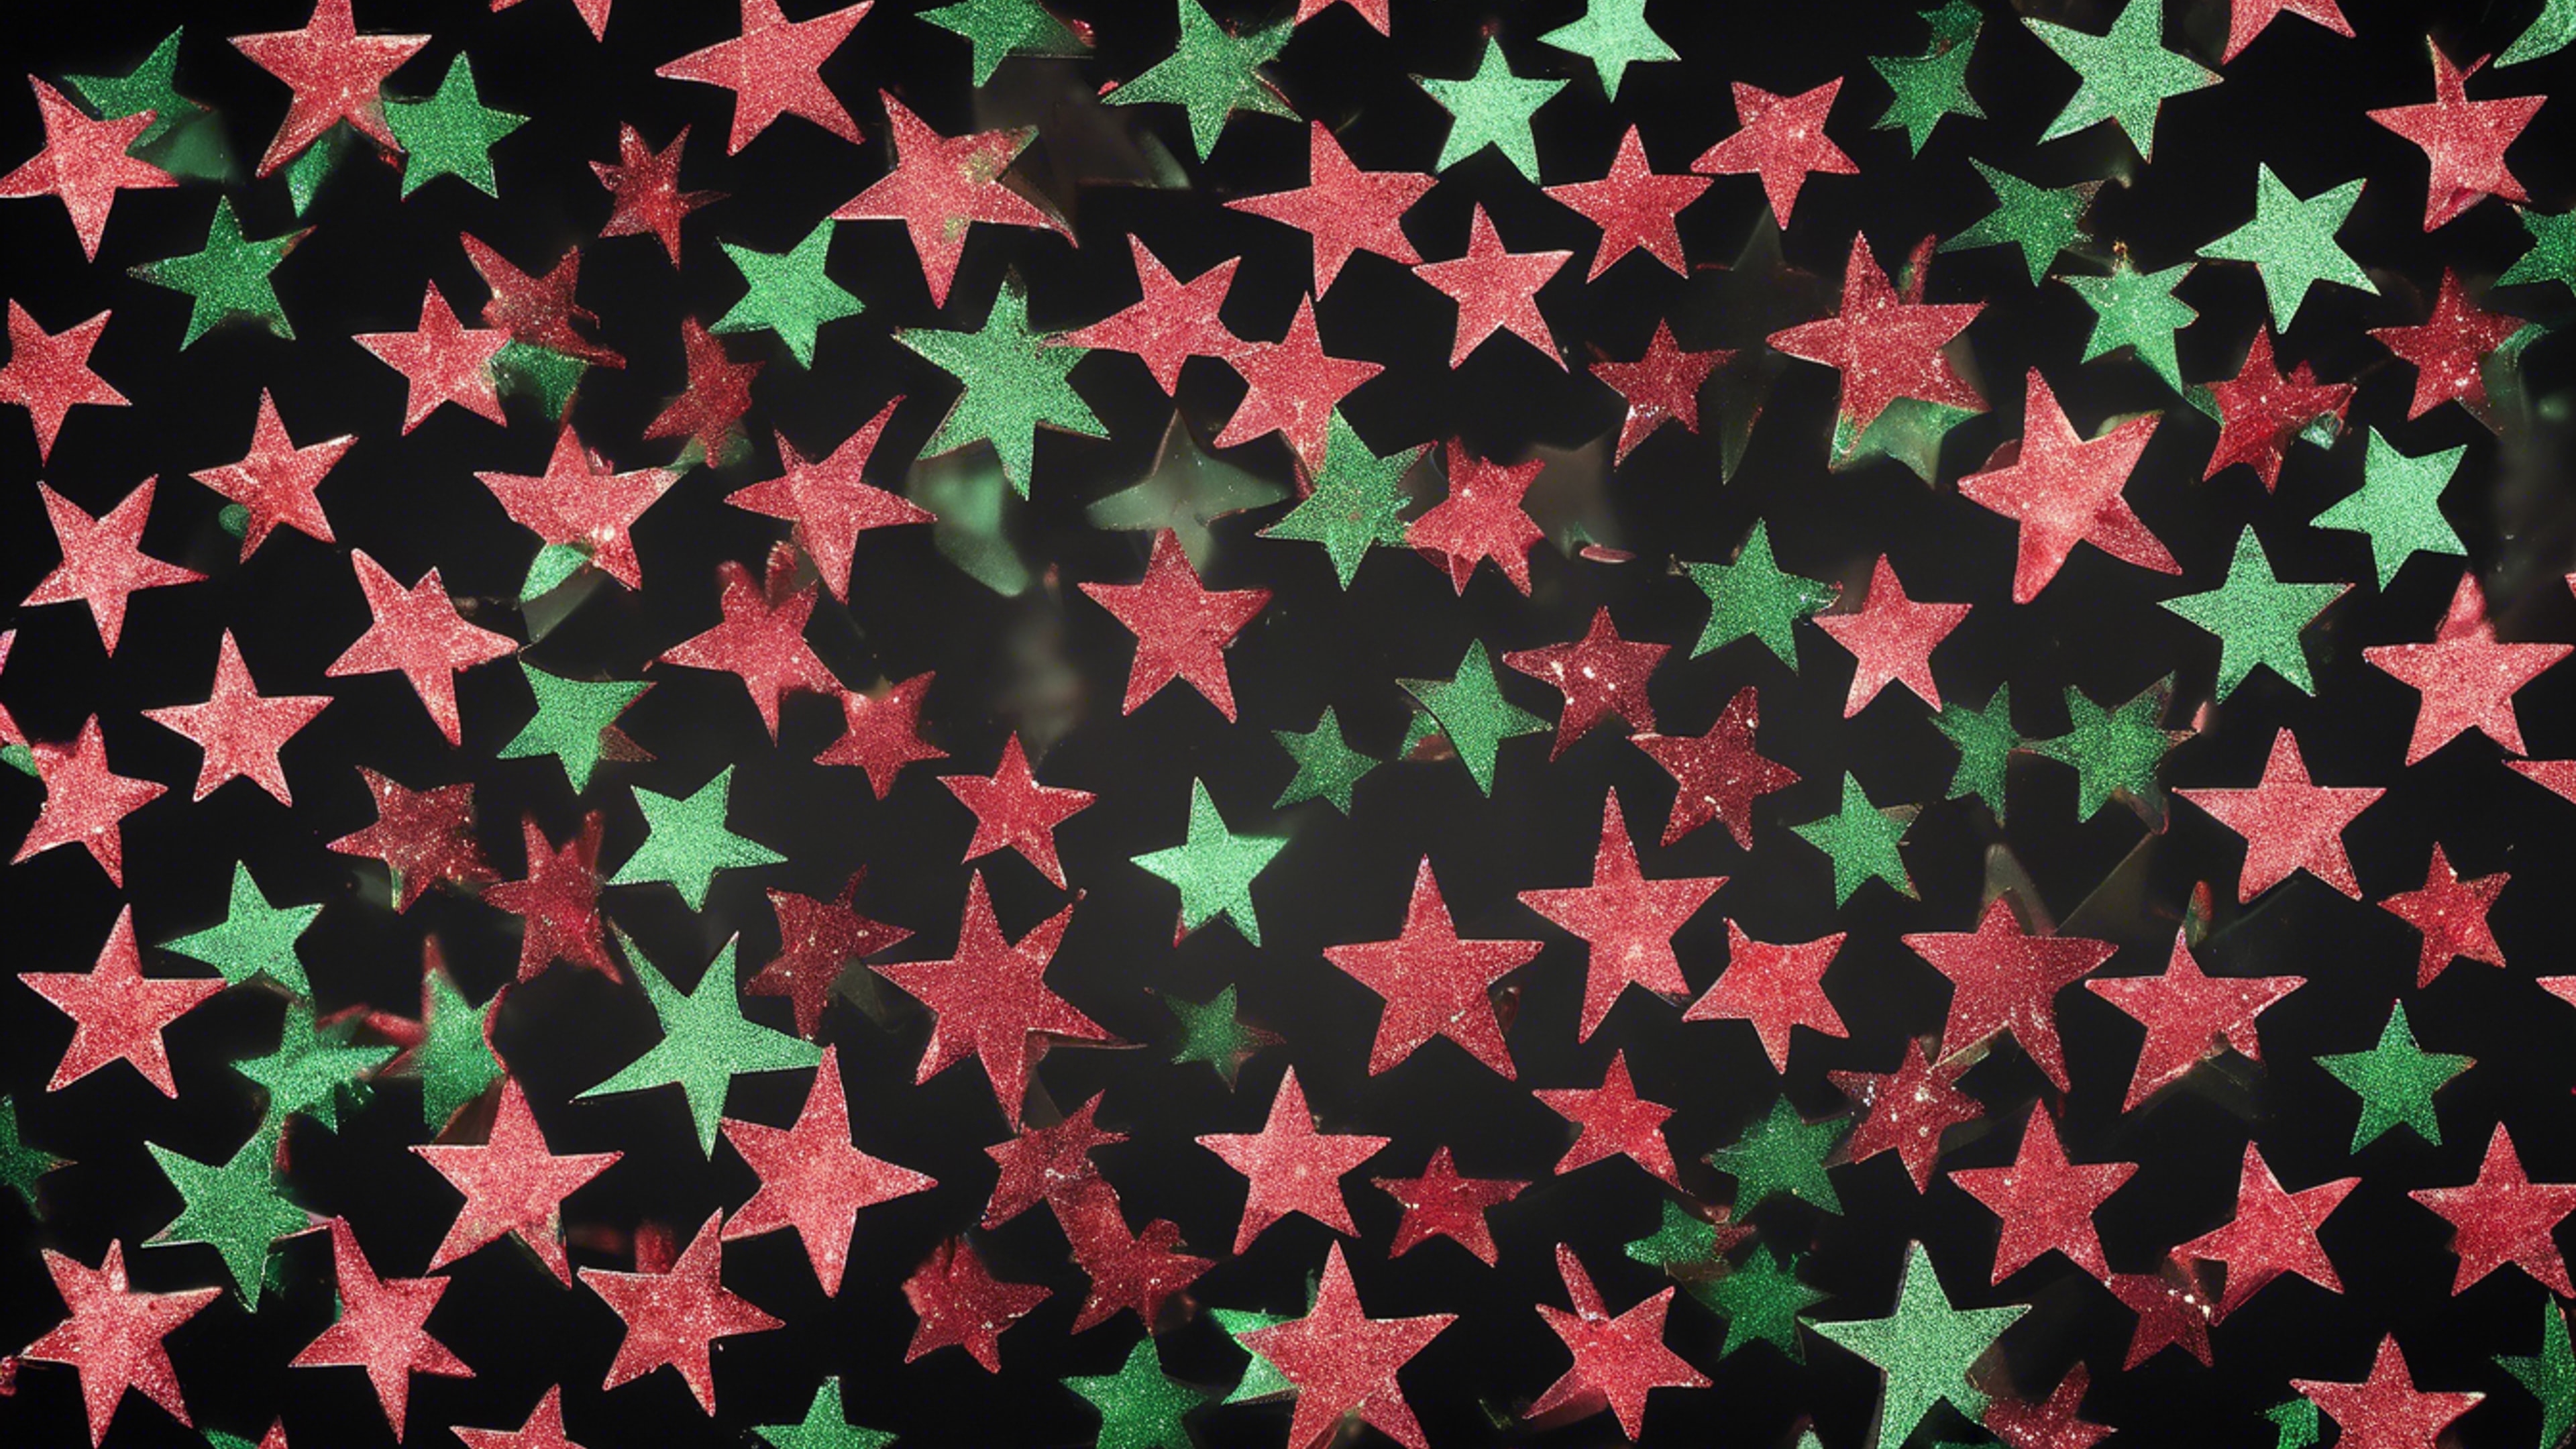 Green and red glitter forming star shapes on a black background Валлпапер[2fe752b5dc5f4f35ba35]